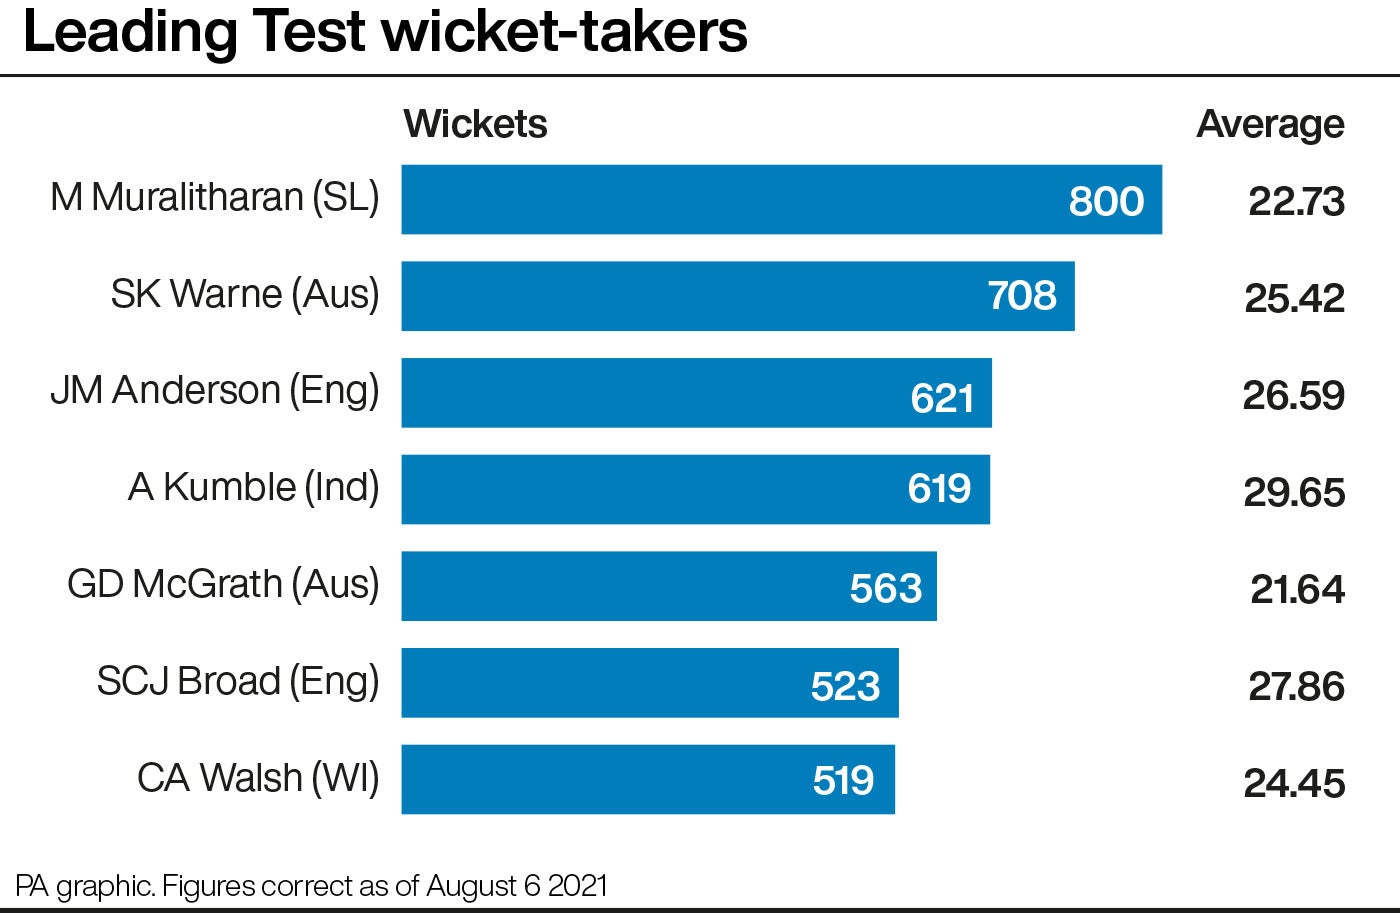 Only two bowlers have taken more Test wickets than James Anderson (PA graphic)